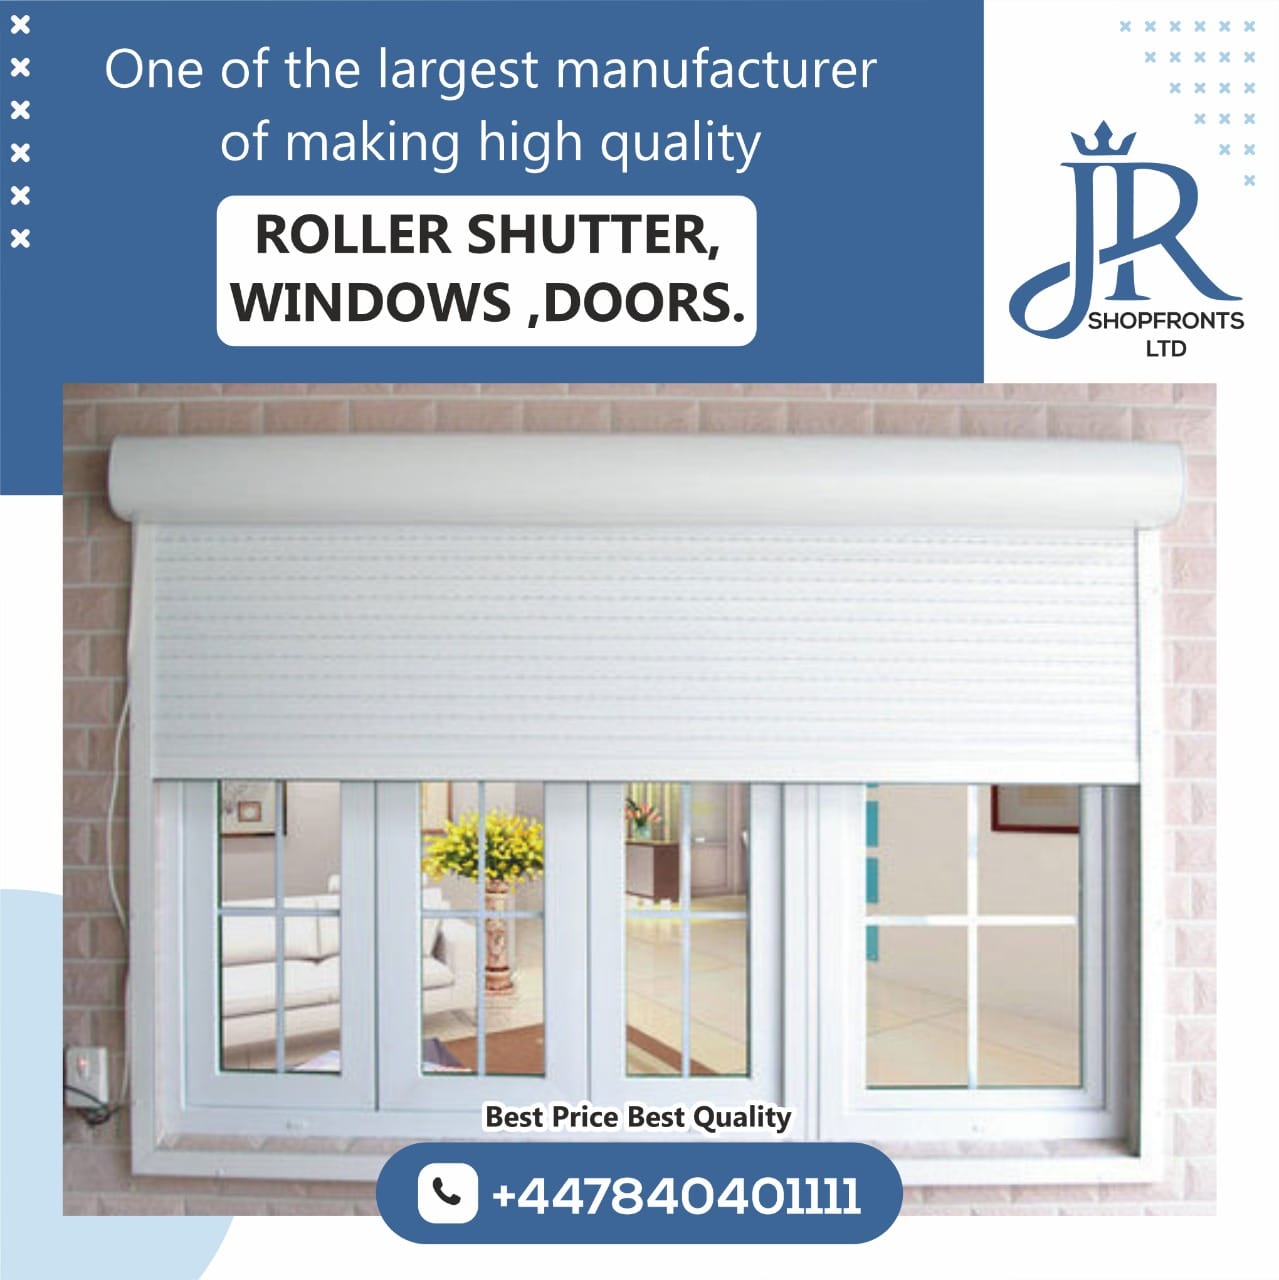 Shutter Company In Glasgow, shutter complany in Glasgow, doors manufactuers in Glasgow, shutters manufacturers in Glasgow, roller shutters manufacturers in Glasgow, doors manufacturers in Glasgow, Shutter Company In Glasgow